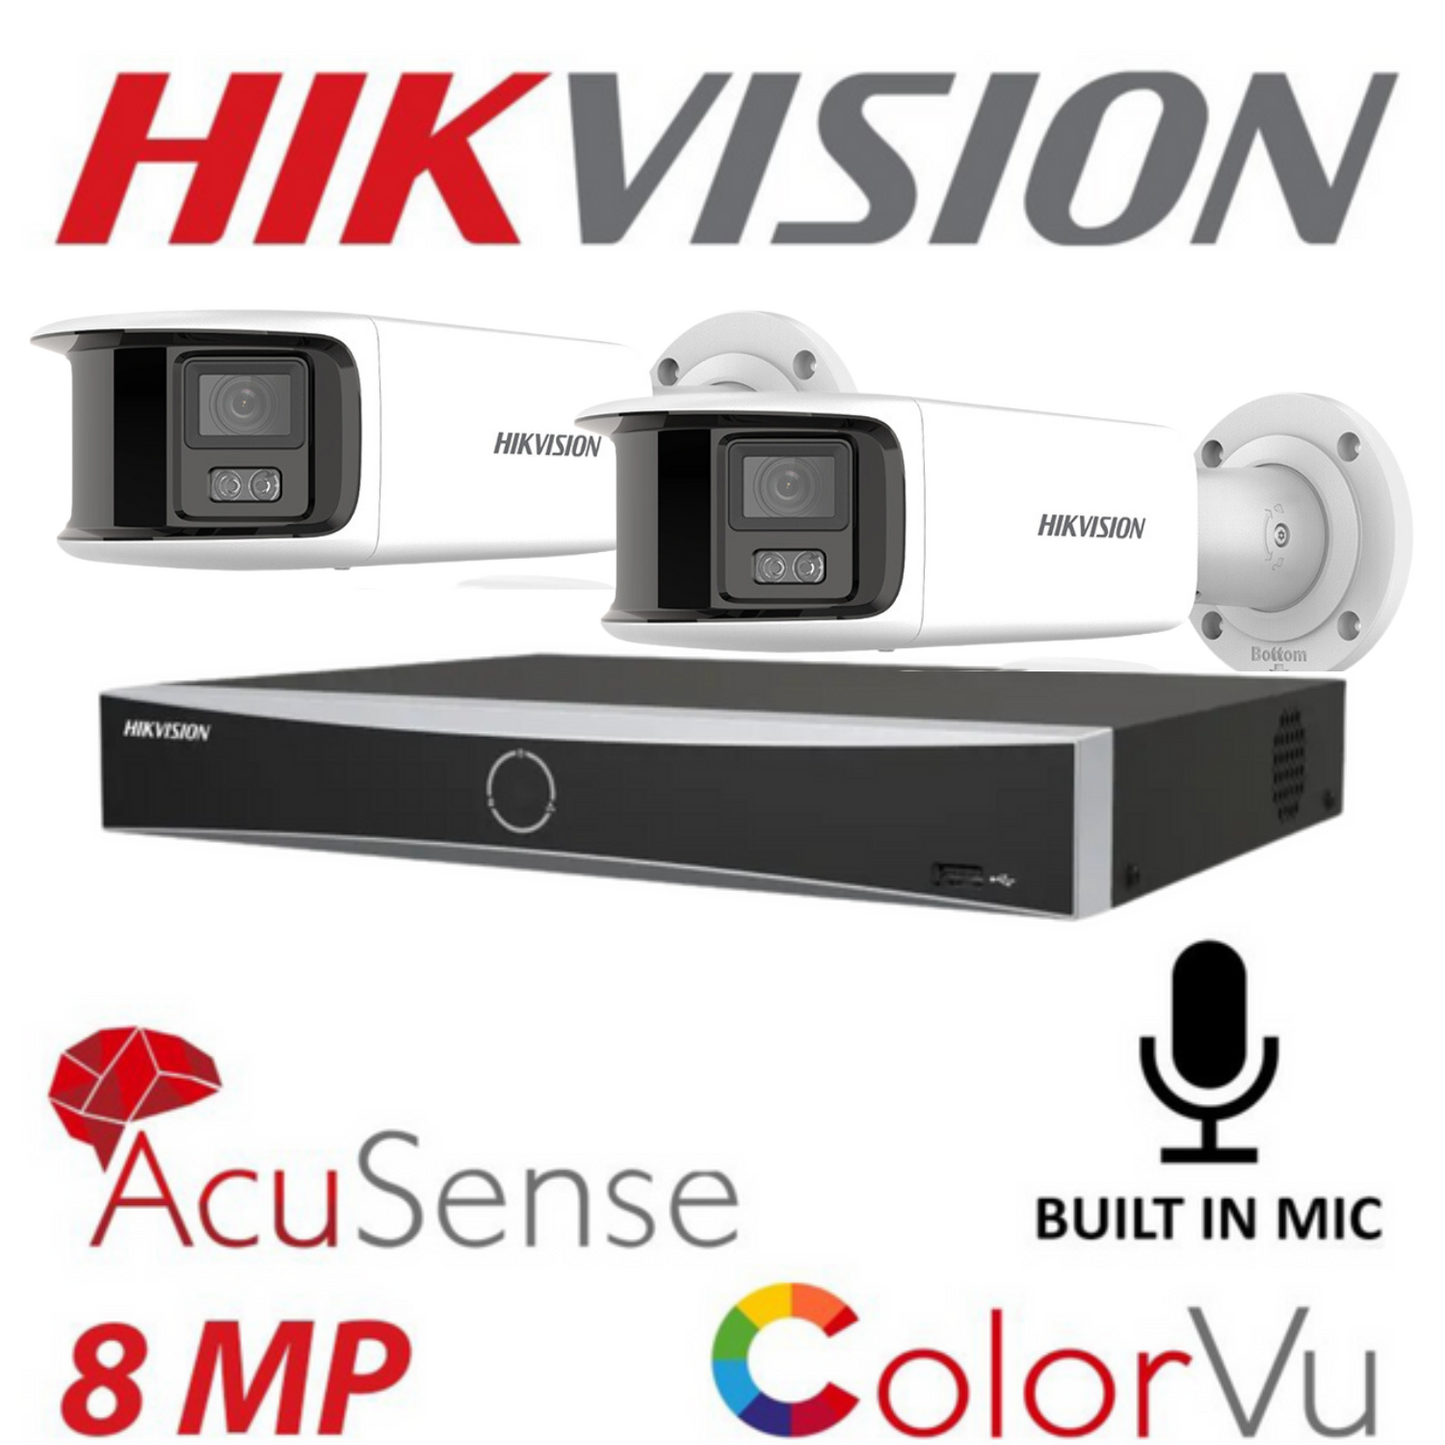 Hikvision CCTV kit, 2 x 8mp Panoramic Dual Camera, Colorvu, Acusense, IP POE and 2 way Audio cameras, 1 x 8 Channel POE NVR